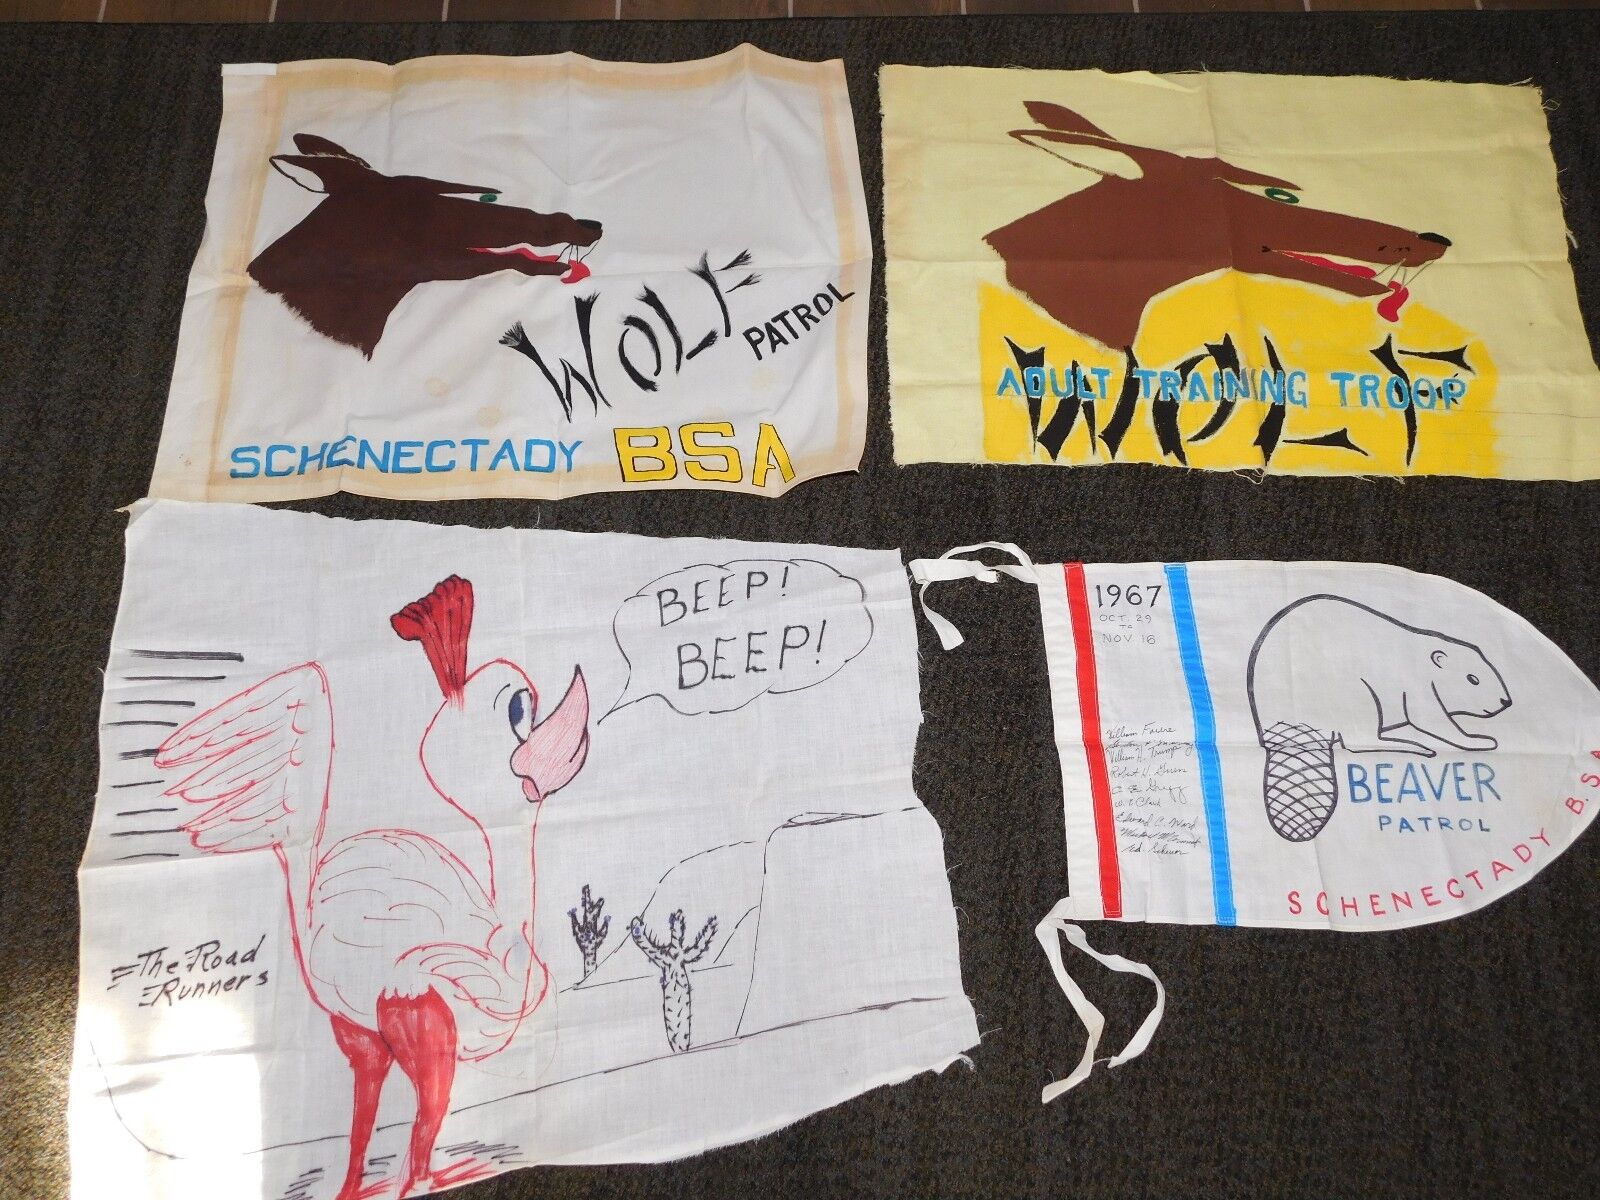 VINTAGE BSA BOY SCOUTS OF AMERICA 1967 BEAVER PATROL WOLF SCHENECTADY BANNERS